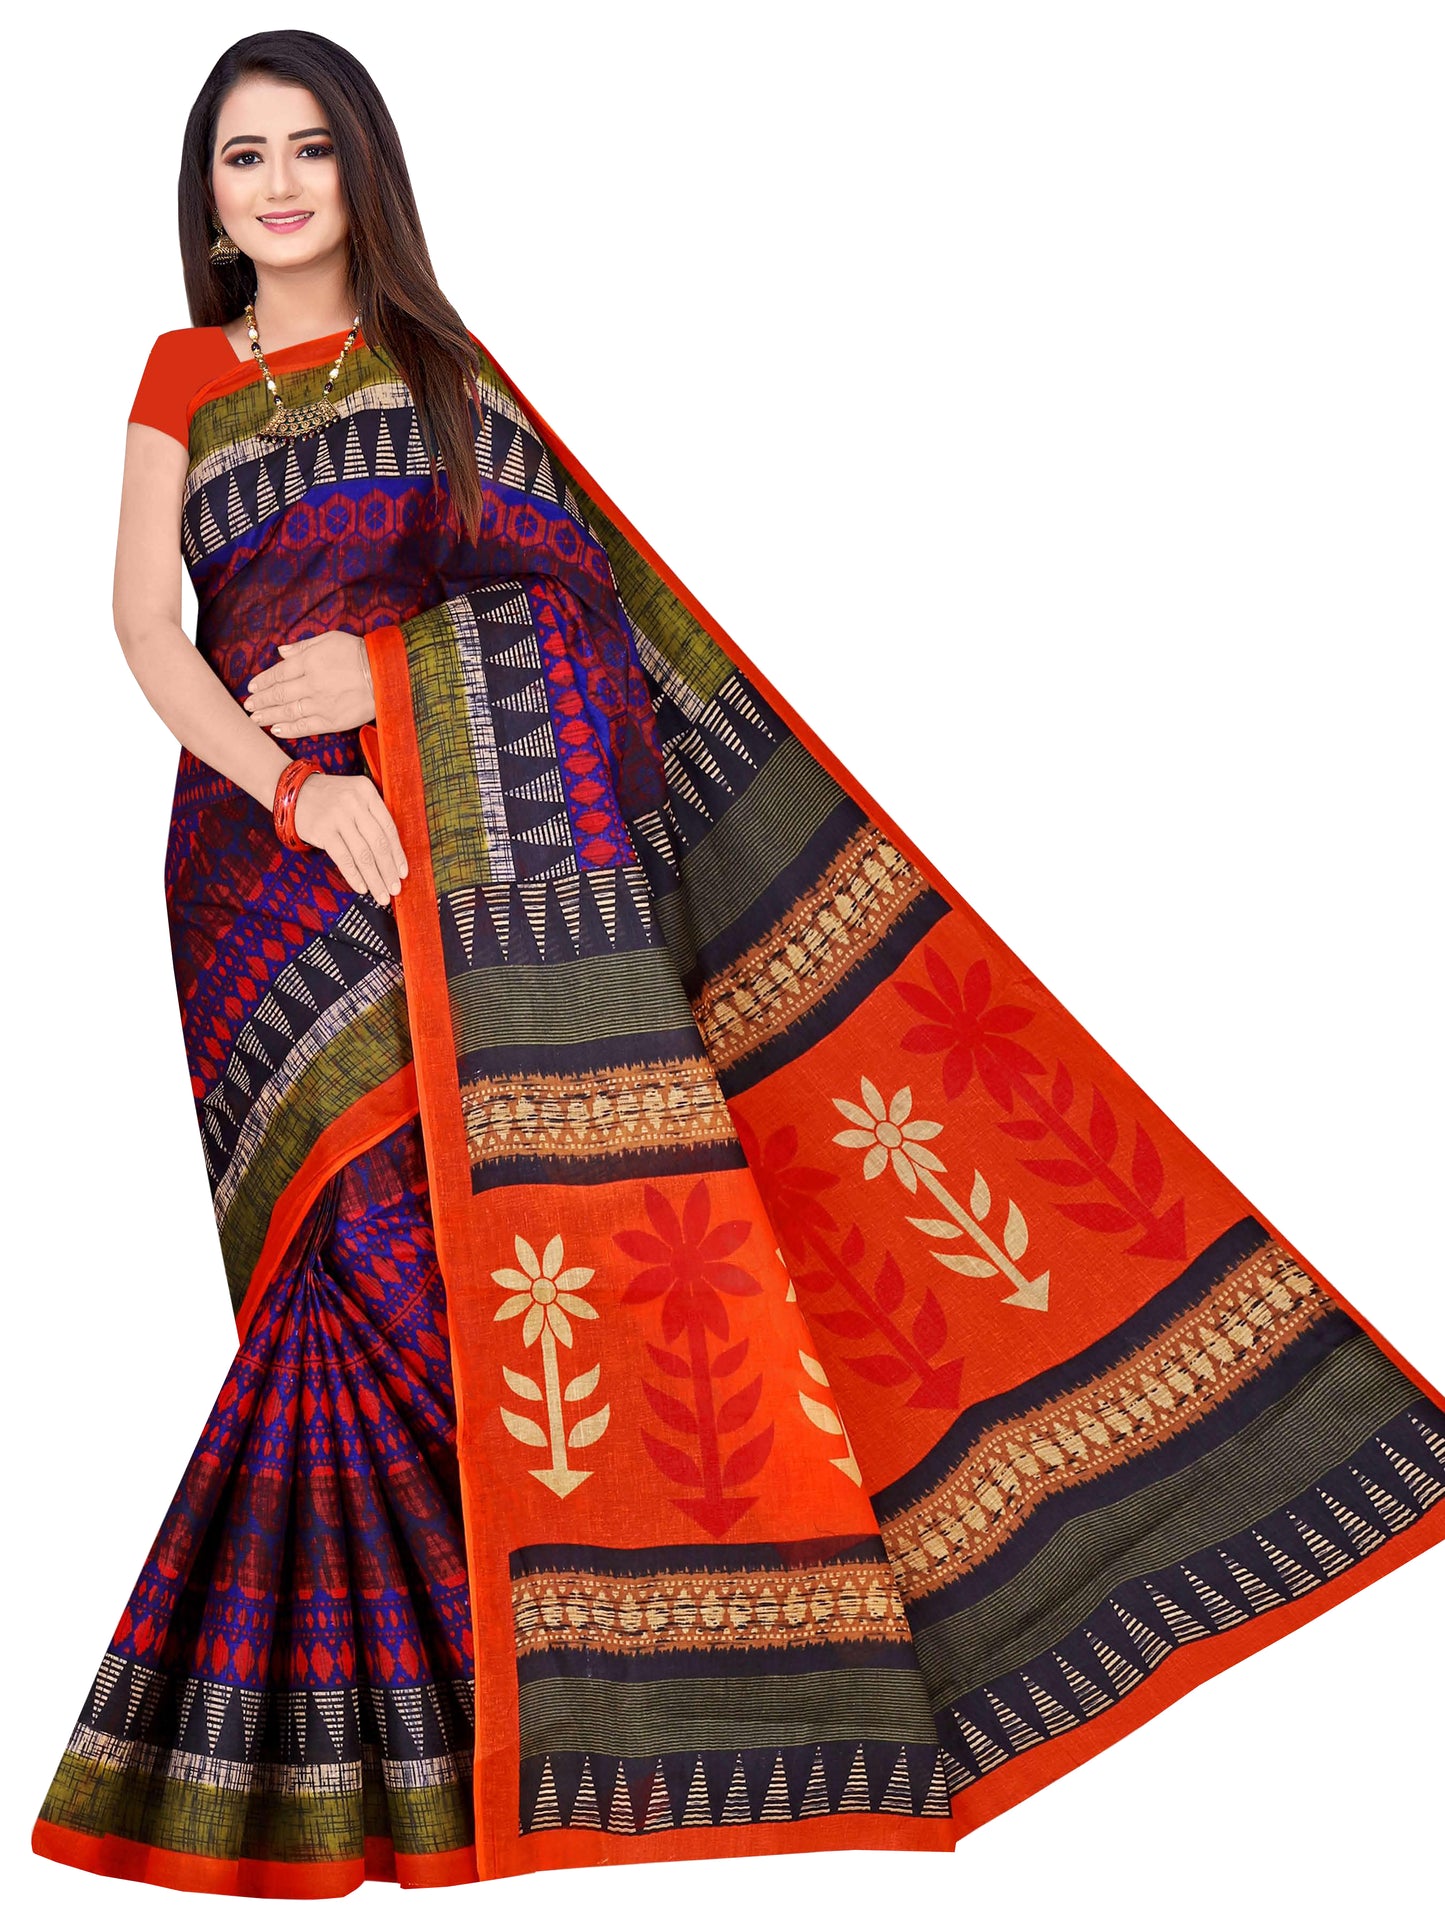 Pure Cotton Saree for Women, Casual Wear (Item Code: XYZCCSKR1)